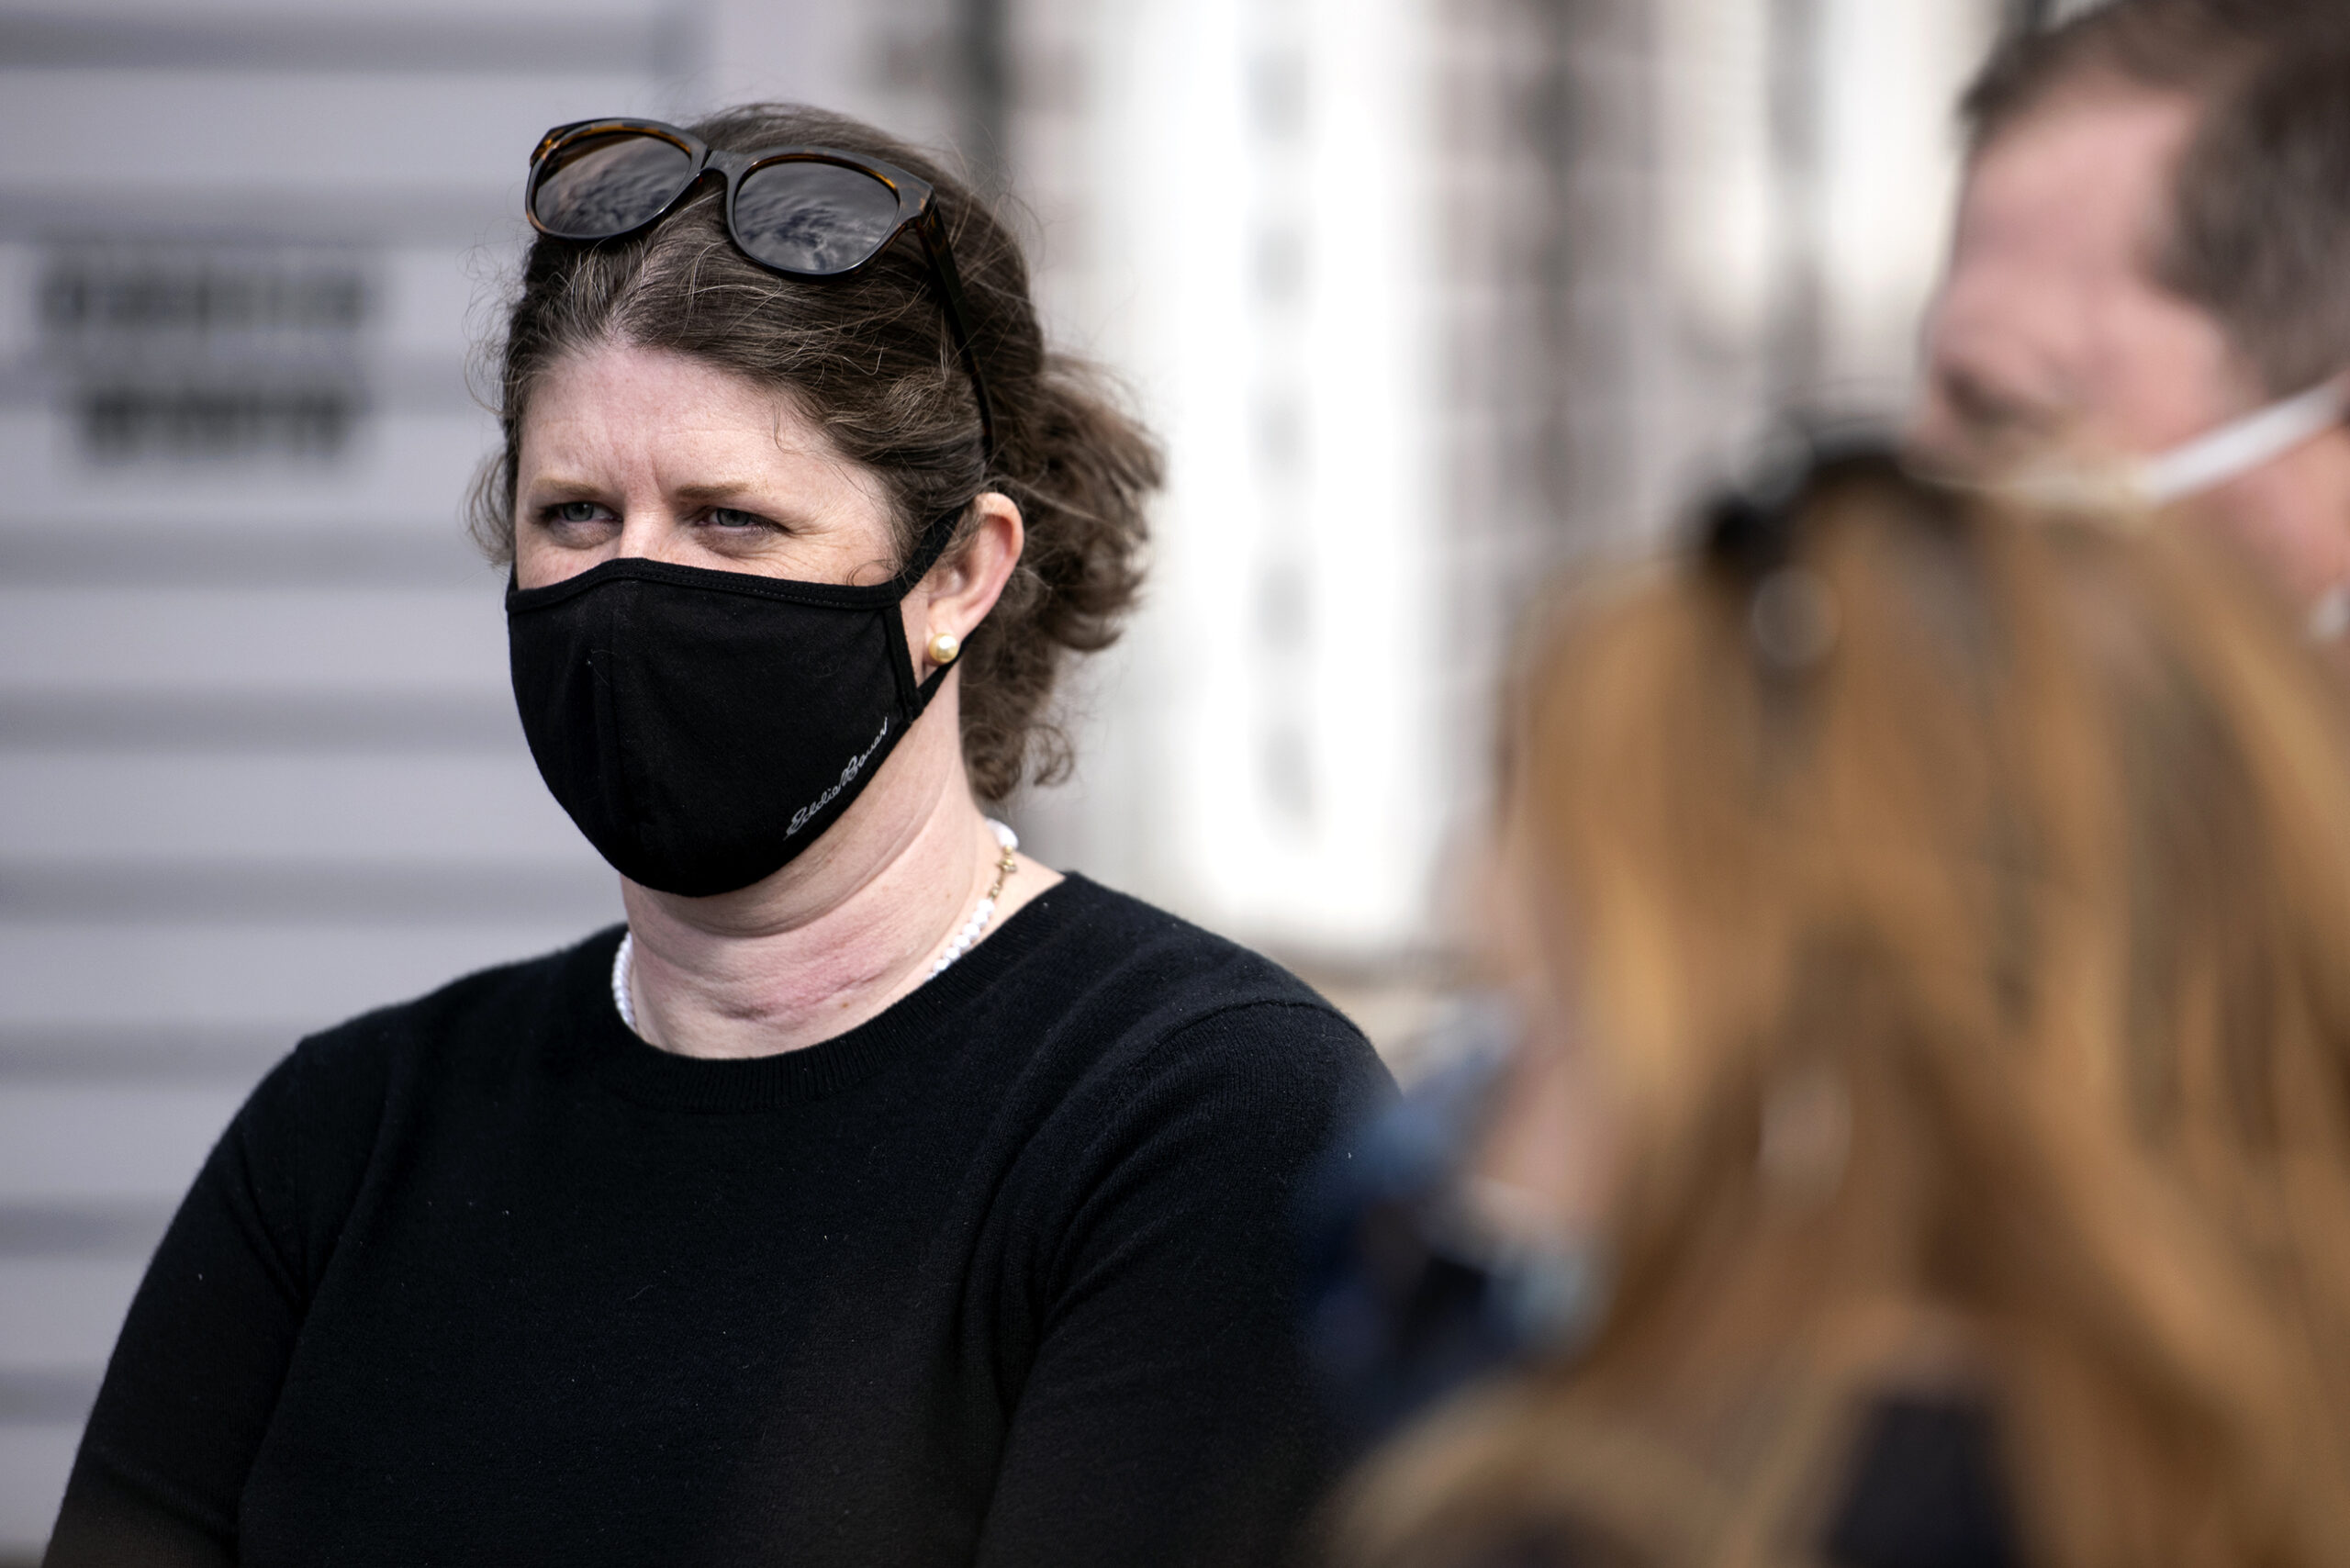 A woman in a face mask attends a campaign event outside.